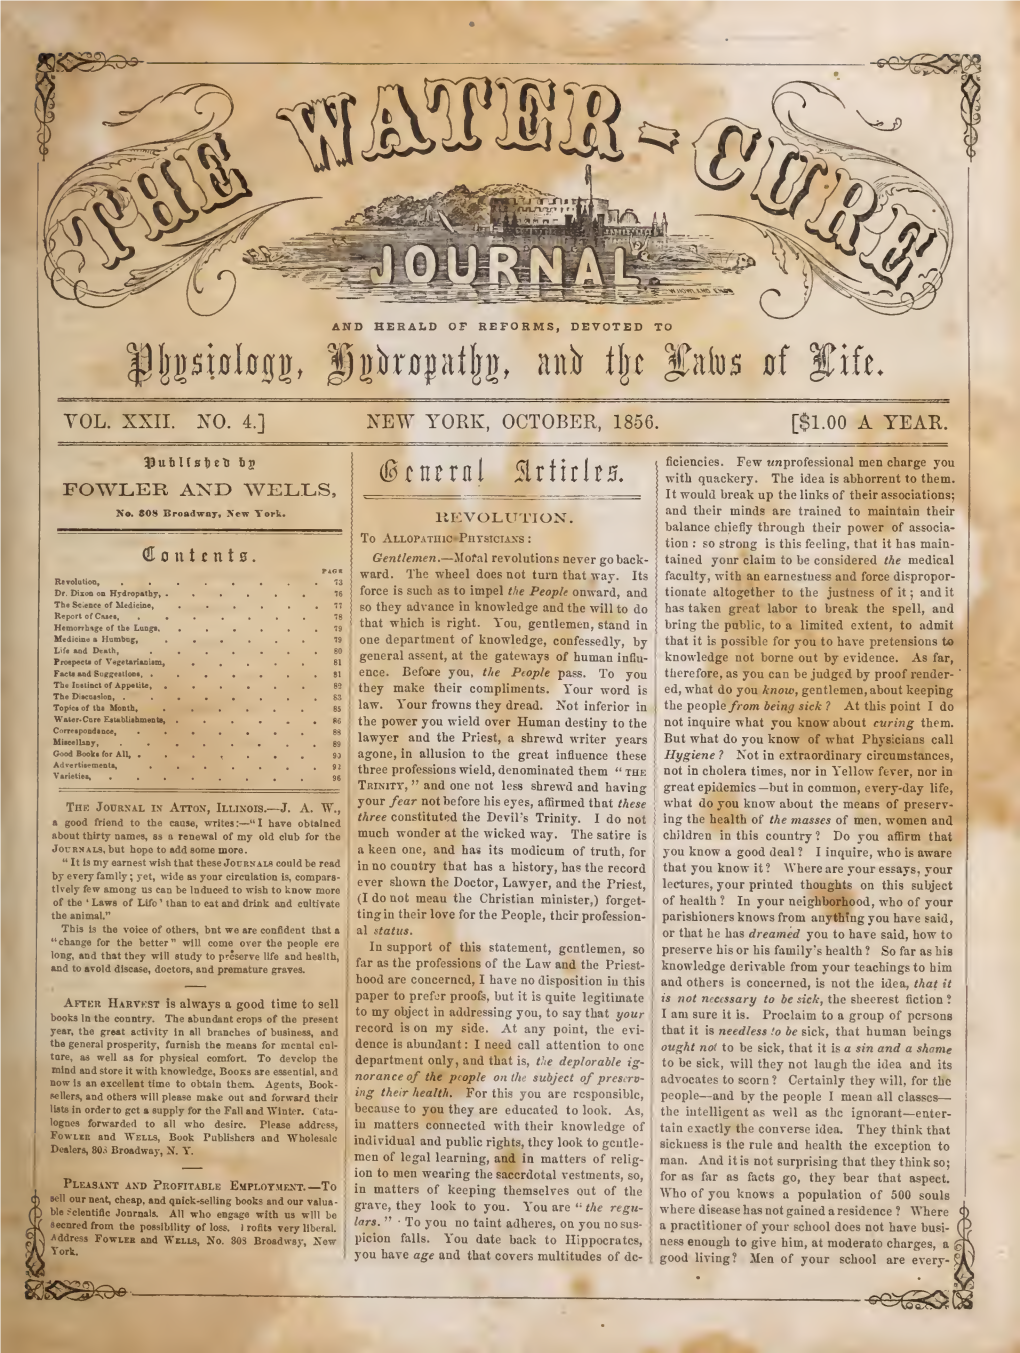 Water-Cure Journal V22 N4 Oct 1856